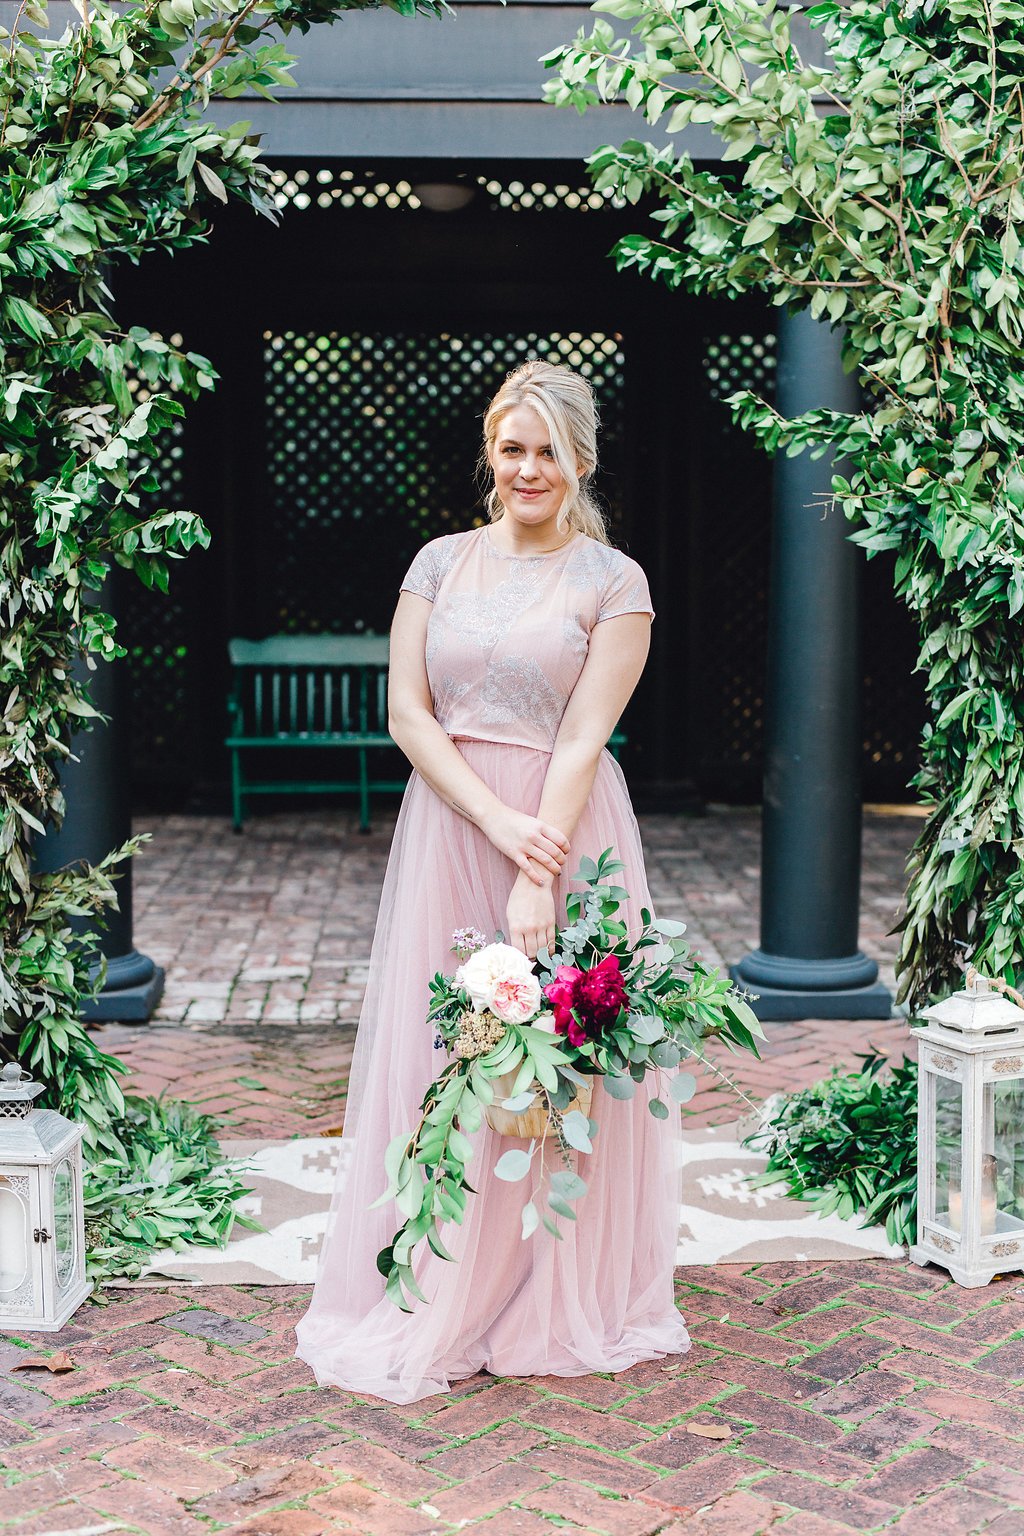 hayley-paige-occasions-bridesmaids-dresses-dusty-rose-bridesmaids-dresses-ships-of-the-sea-wedding-inspiration-savannah-bridal-boutique-savannah-bridesmaids-dresses-special-occasions-dresses.JPG